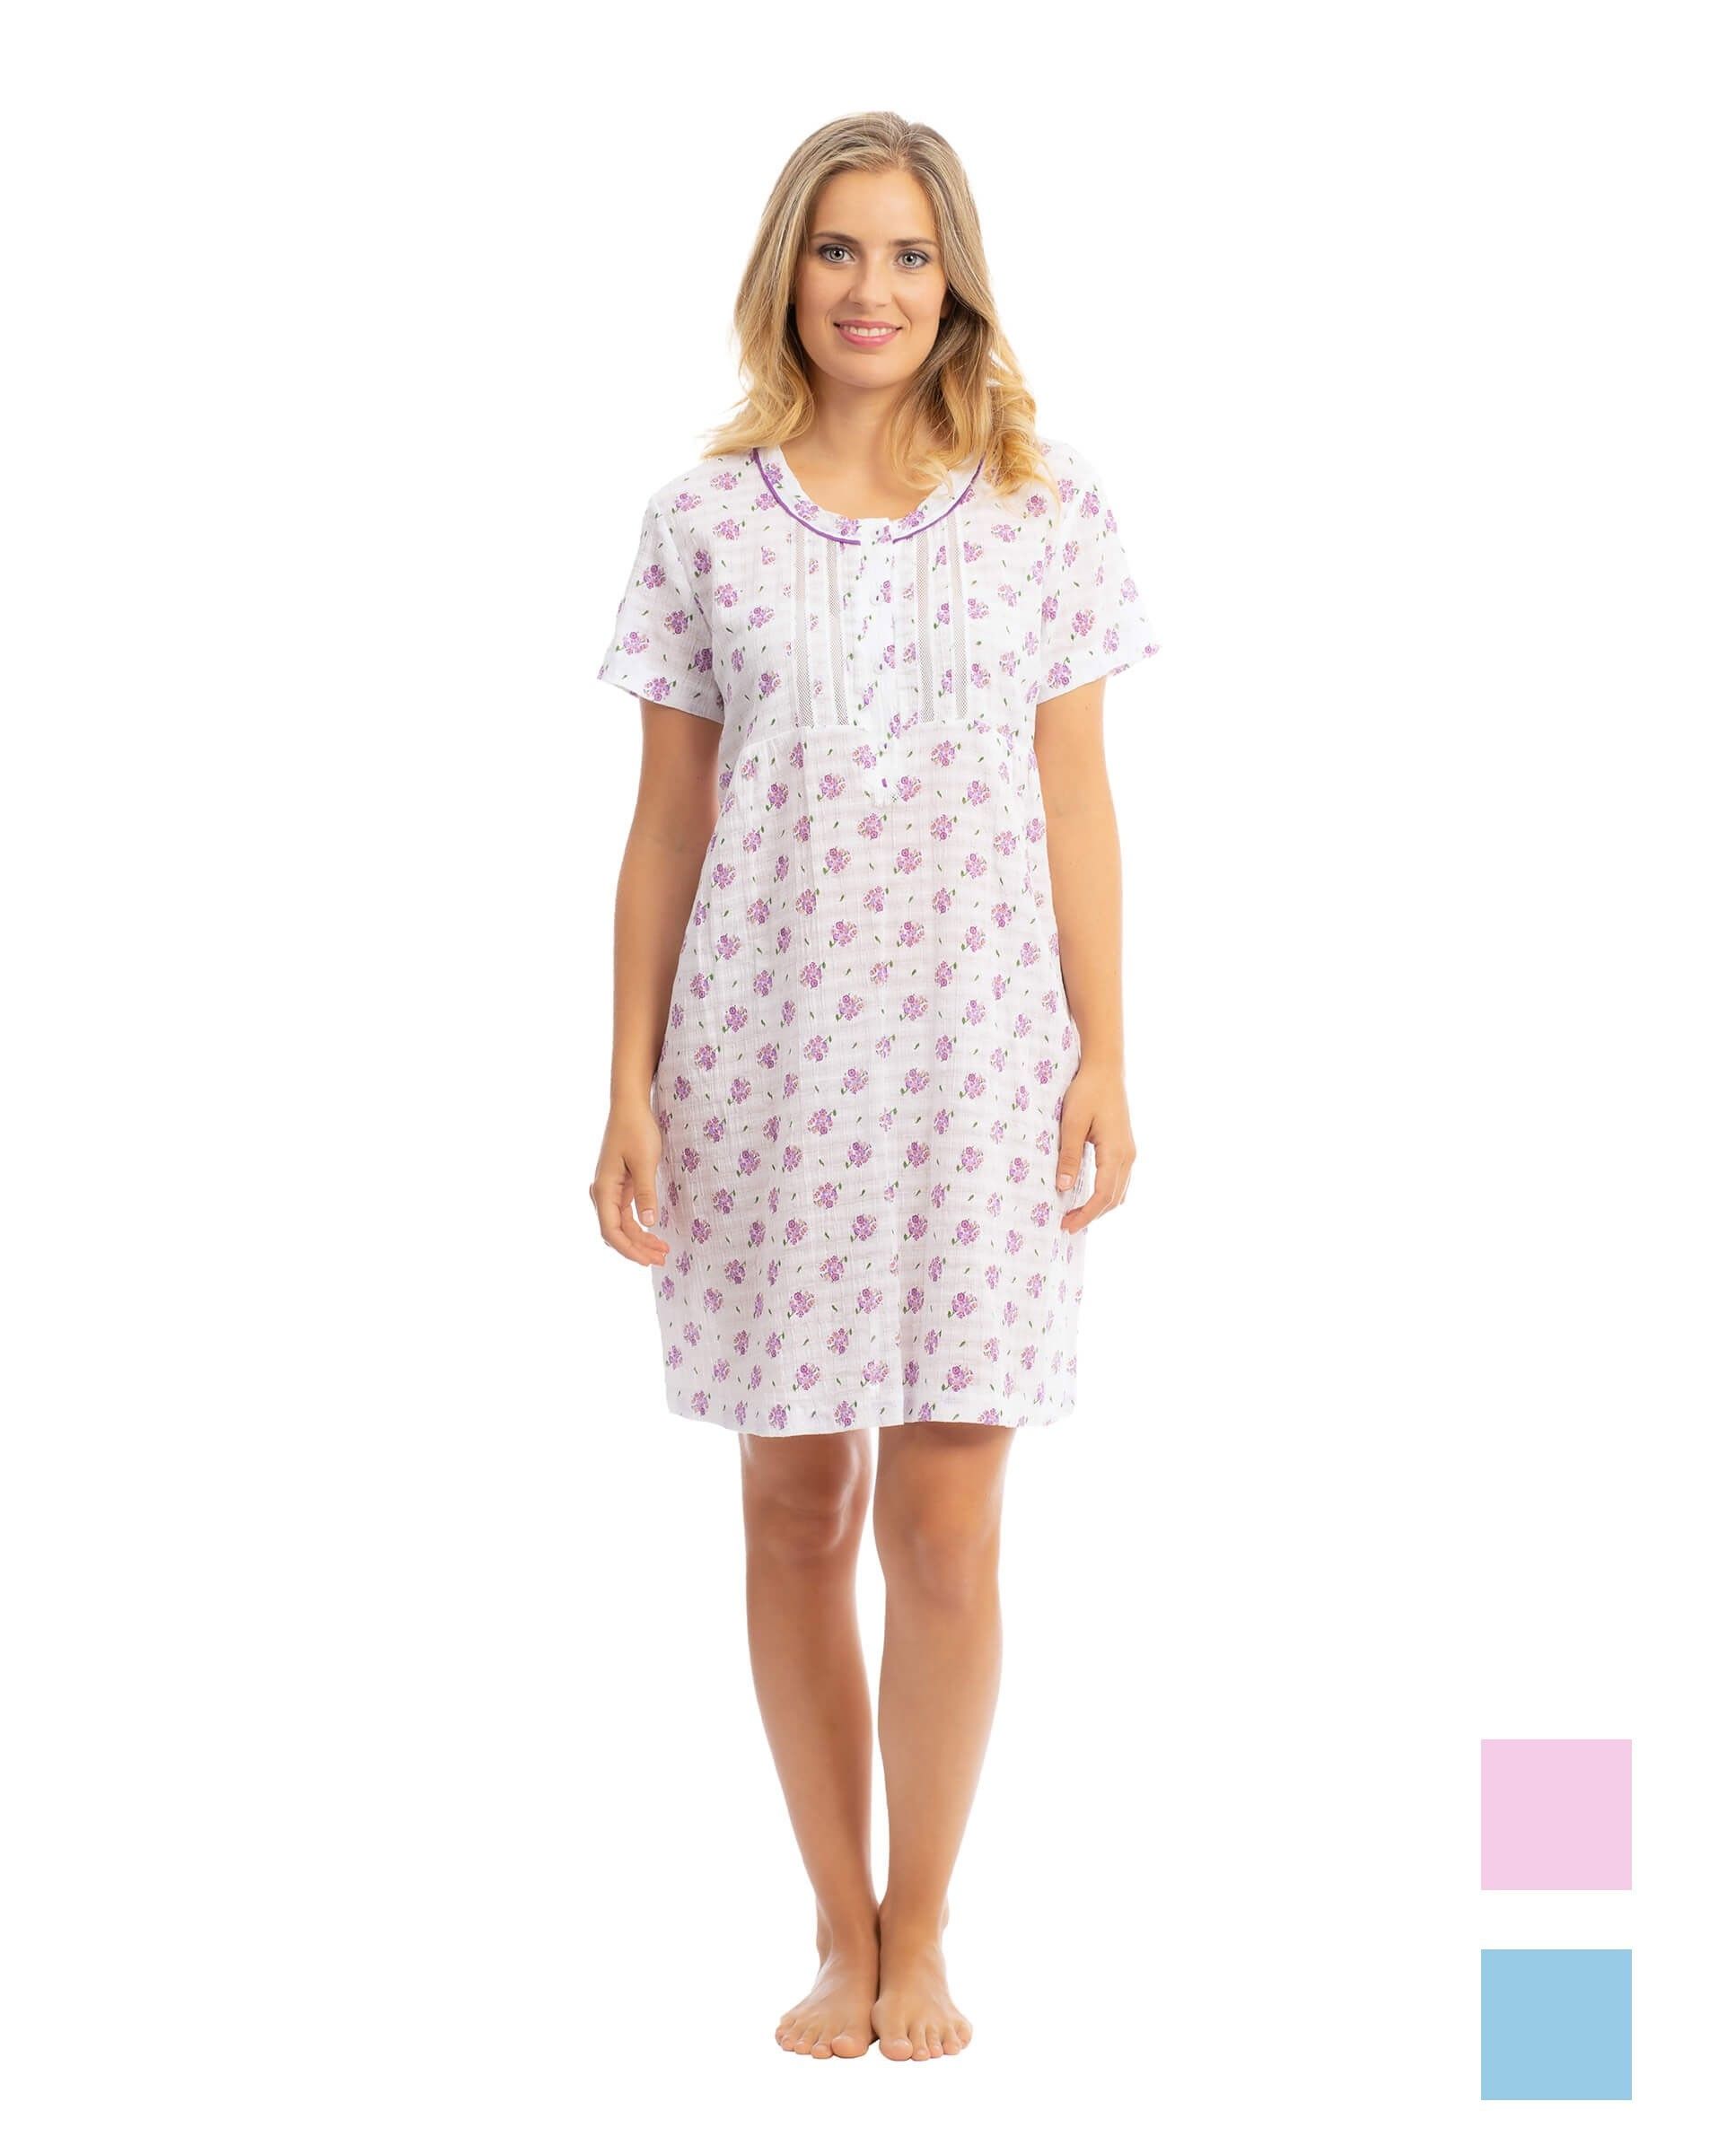 Women's short-sleeved summer nightgown with delicate lilac wildflower print